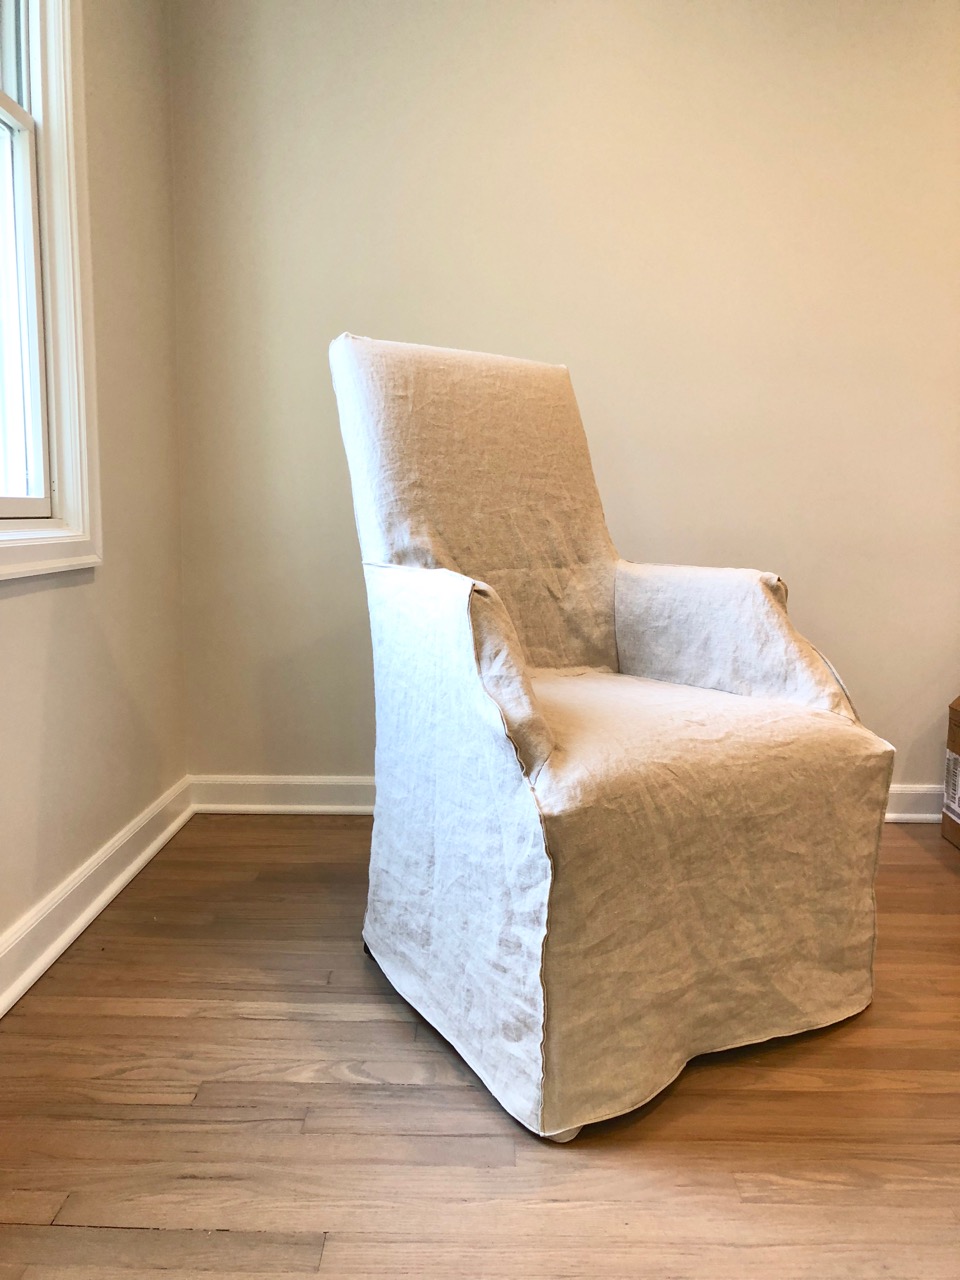  This client needed new life breathed into her Restoration Hardware chairs -- we did a custom slipcover in Otis Oatmeal from Cisco Brother's upholstery fabric line. 